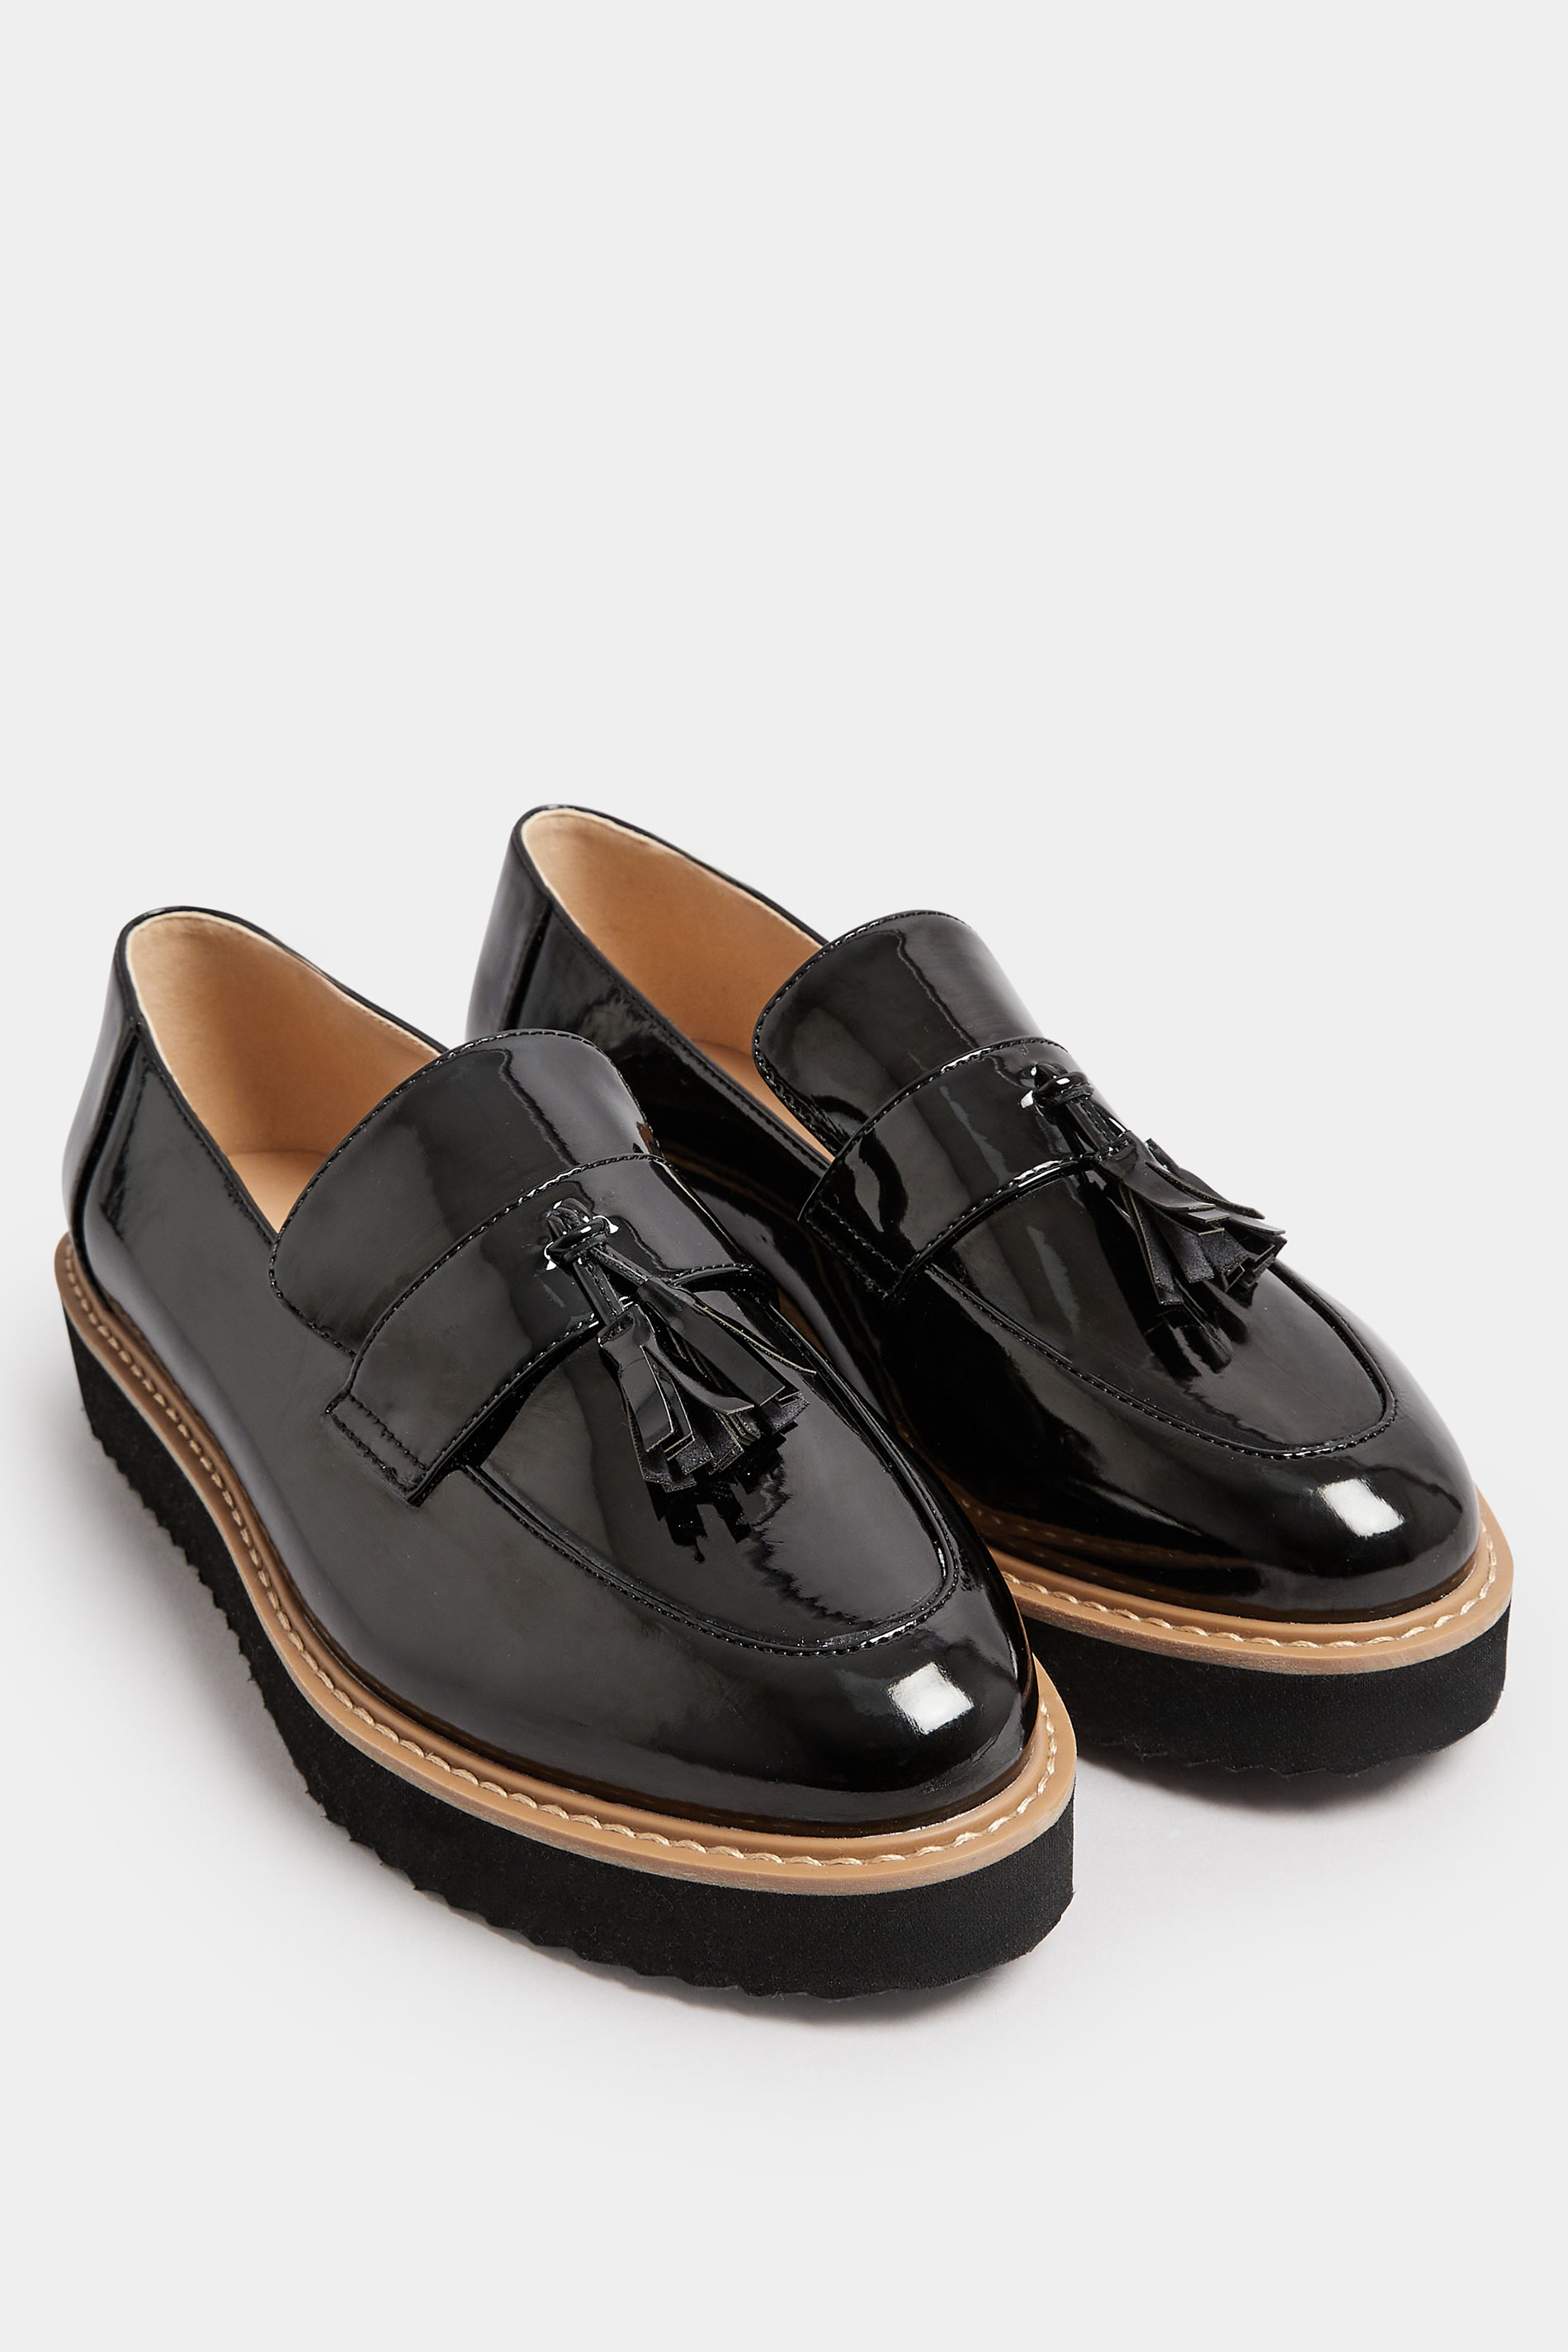 Black Patent Tassel Loafers In Extra Wide EEE Fit | Yours Clothing 2